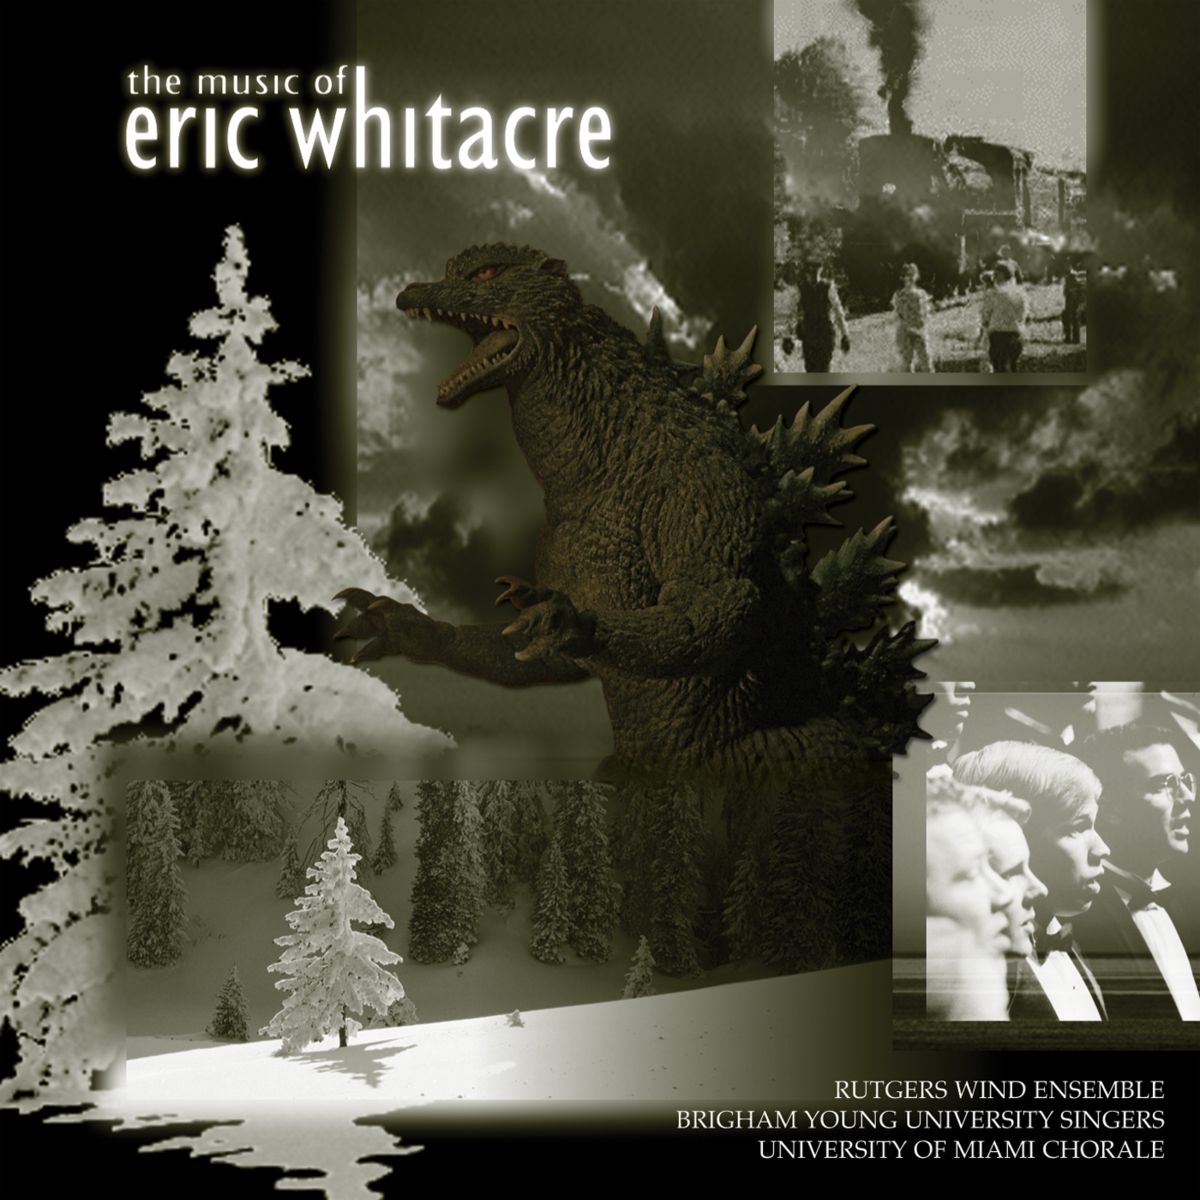 Music of Eric Whitacre, The - click here